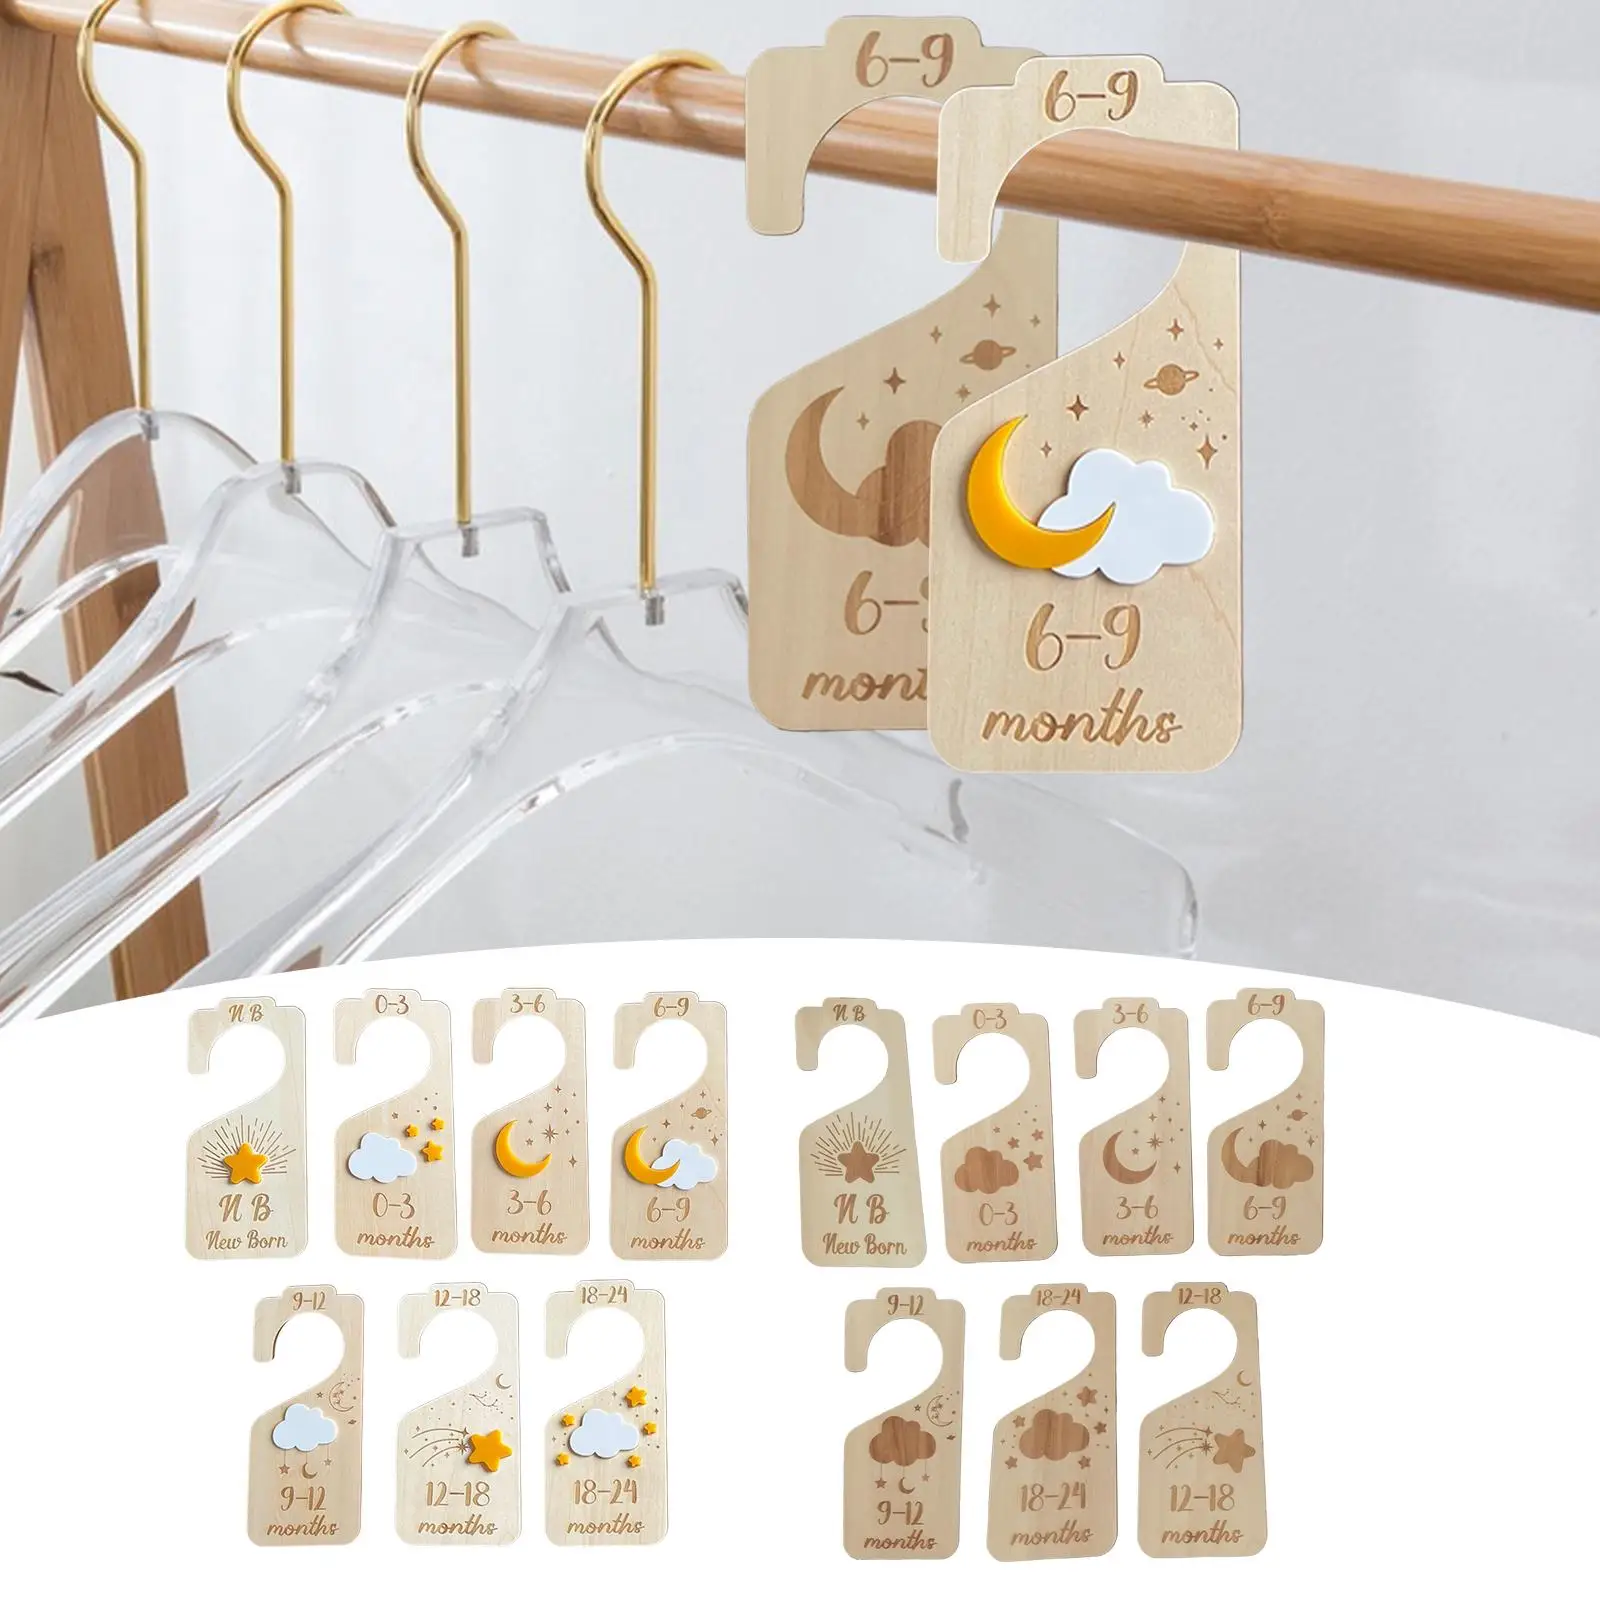 7 Pieces Baby Clothes Organizers Durable Wooden from Newborn to 24 Months Hanger Dividers for Home Bedroom Living Room Mom Gifts